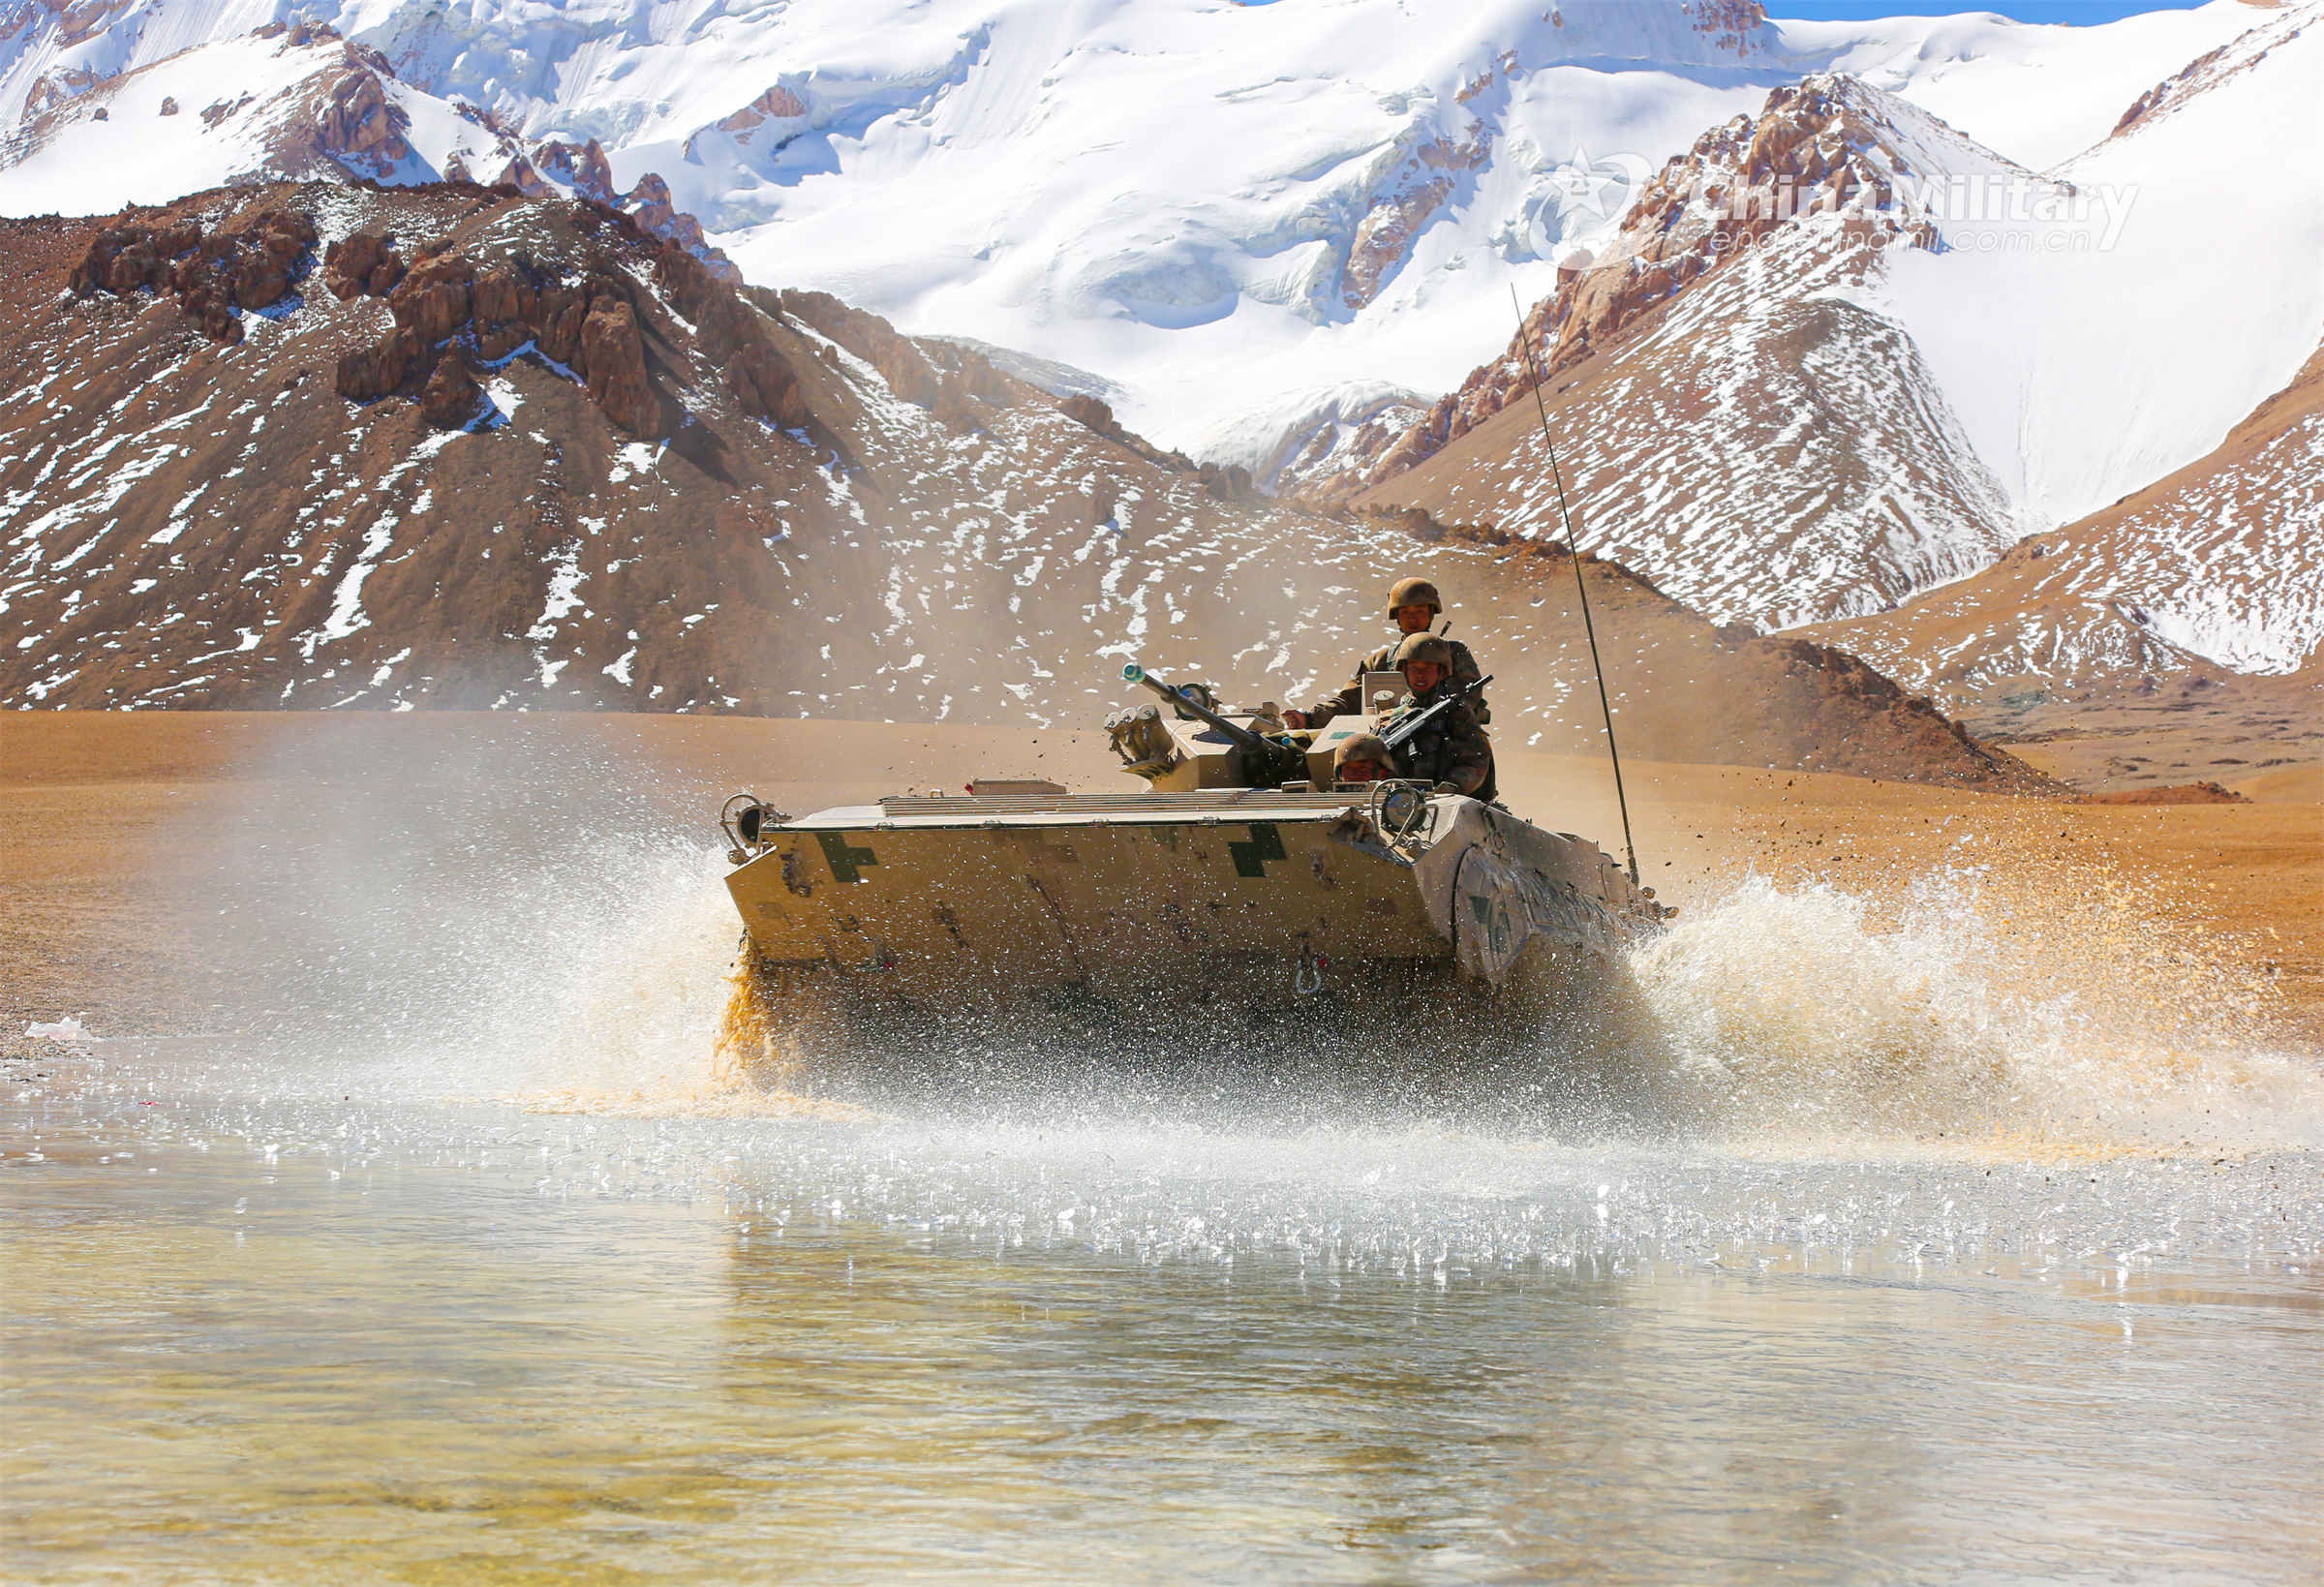 General 2400x1639 Chinese Army tank soldier mountains military watermarked military vehicle vehicle 2022 (year) splashes water splash training military training